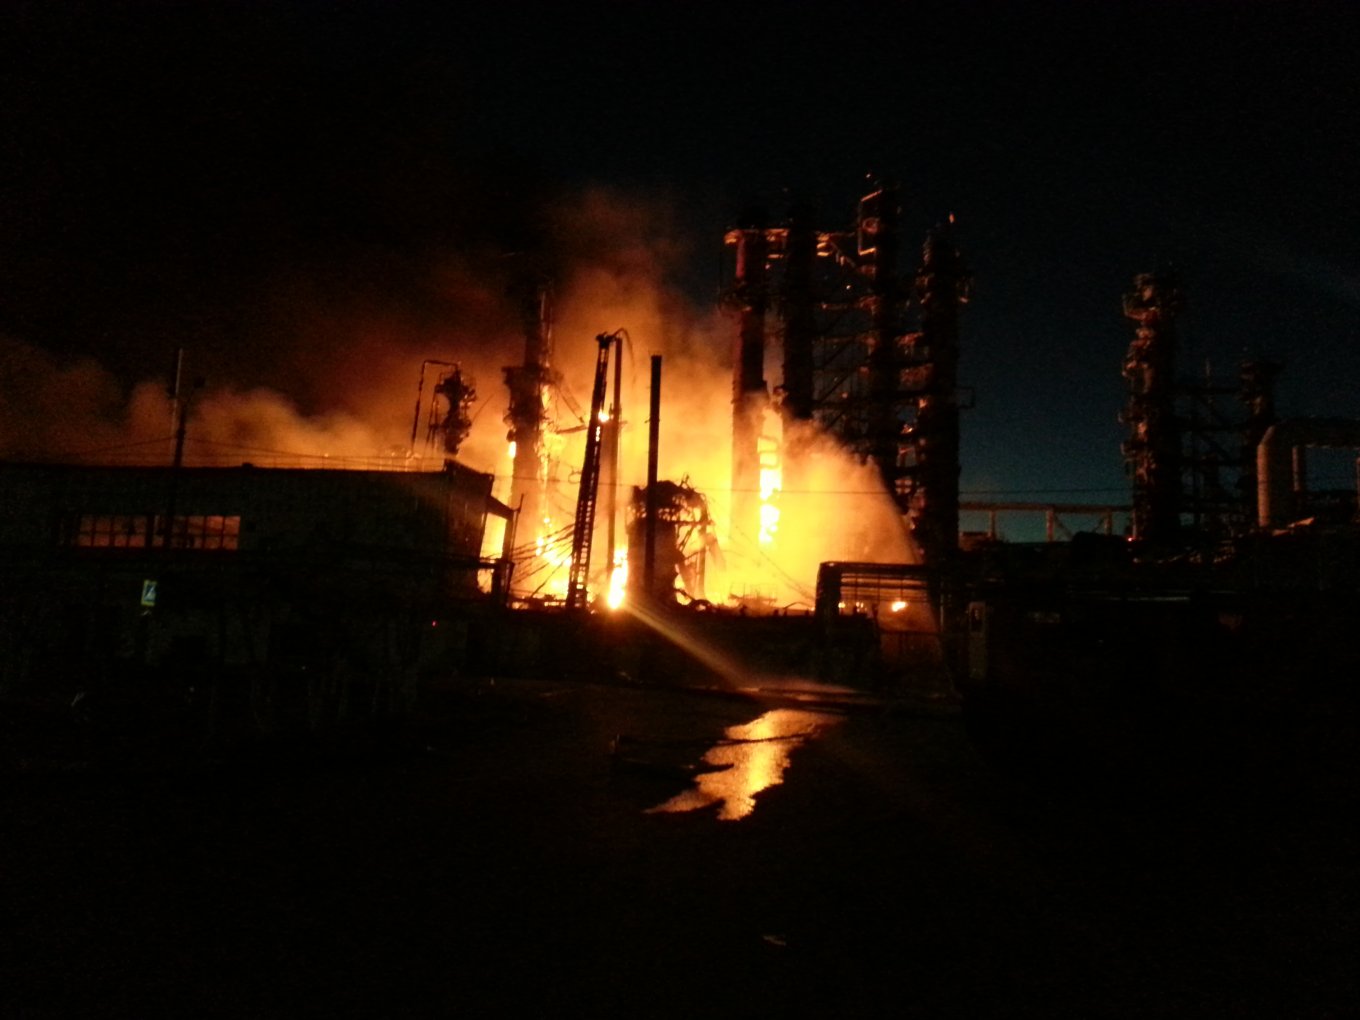 How Much russia is Losing Due to Ukrainian Strikes on Oil Refineries, A fire at the Achinsk refinery in 2014, Defense Express